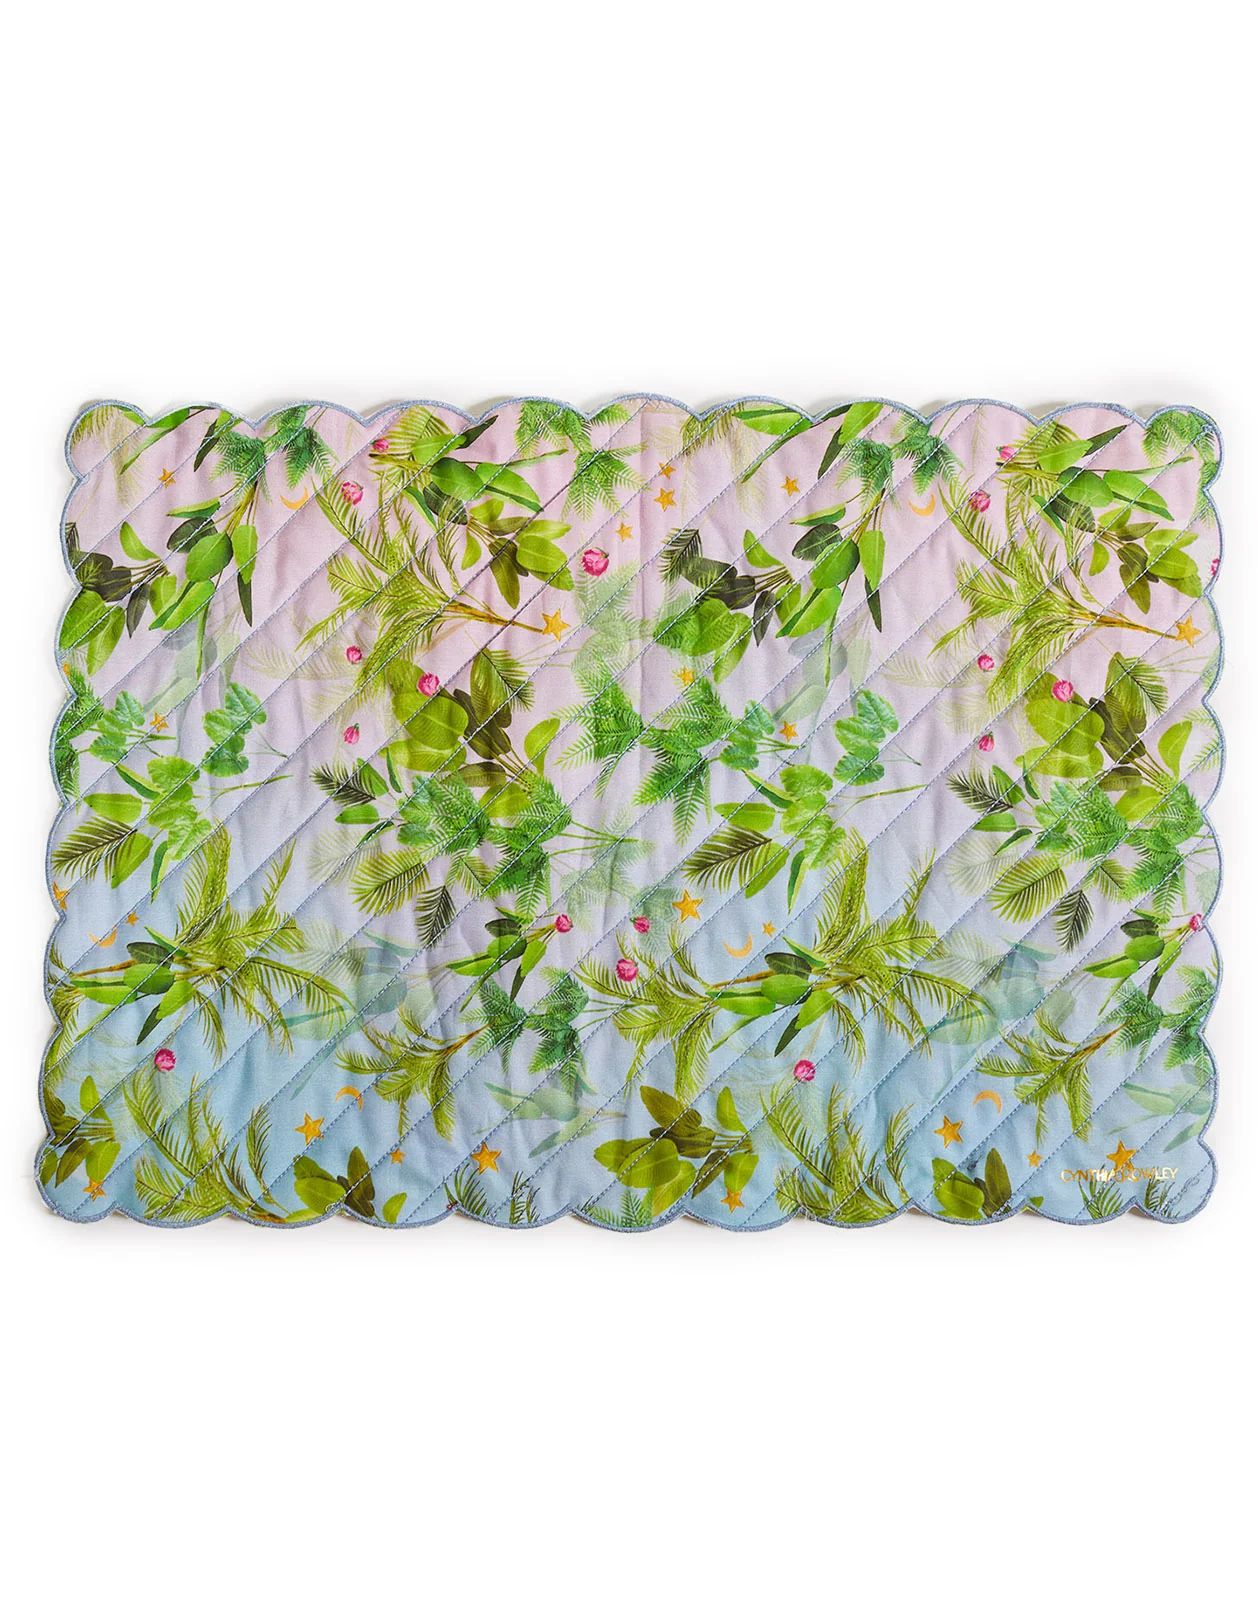 Quilted Cotton Placemat | Cynthia Rowley